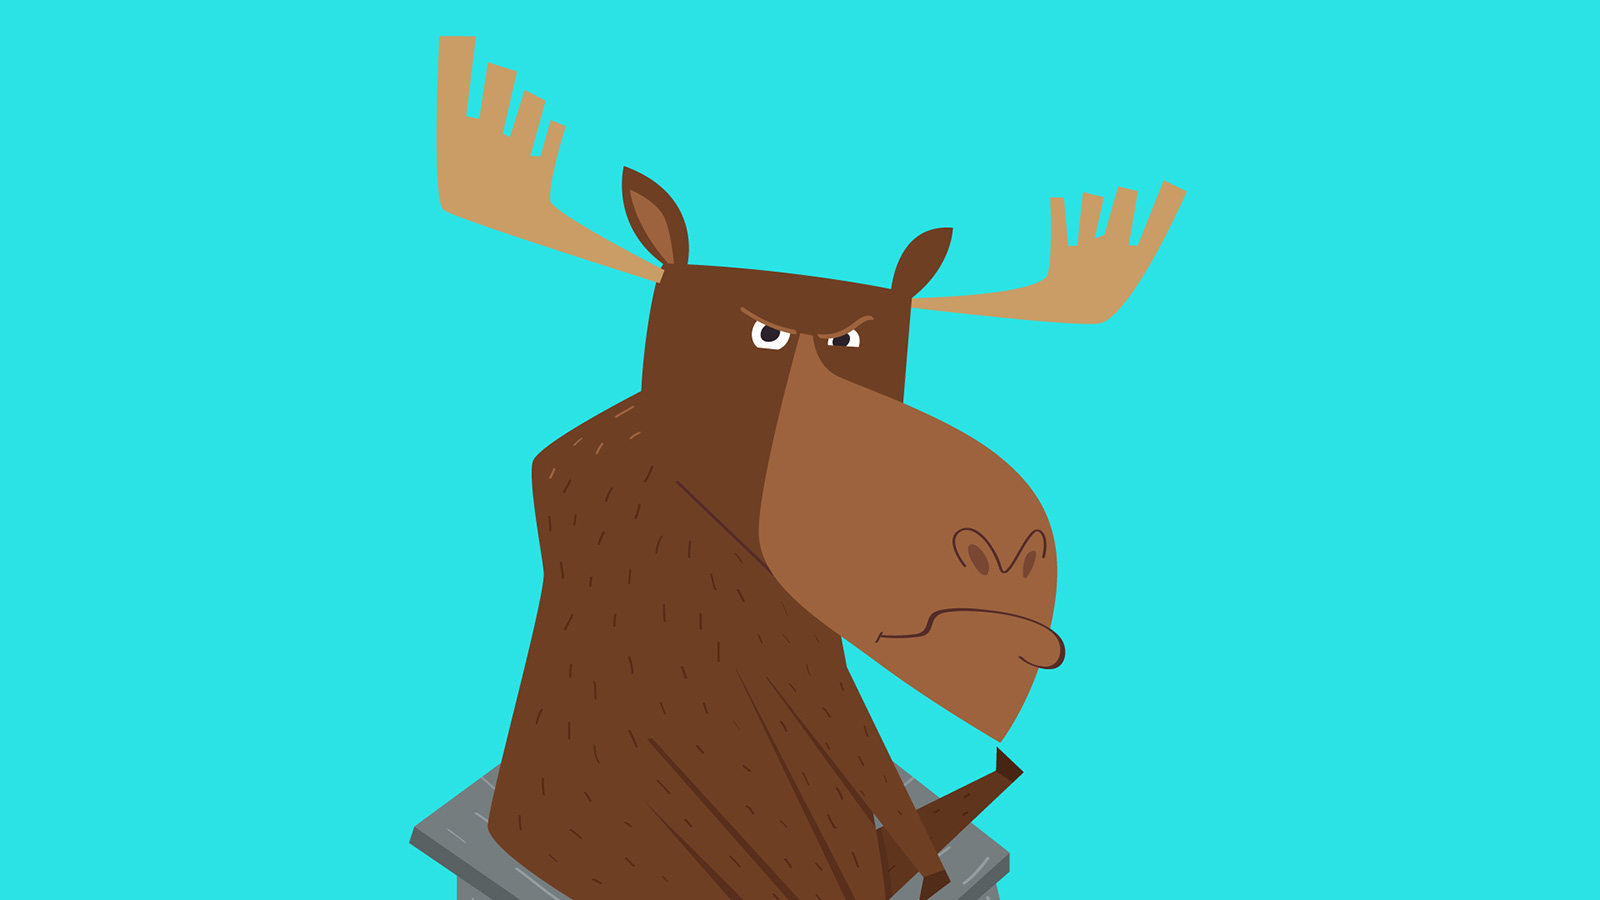 Just a moose